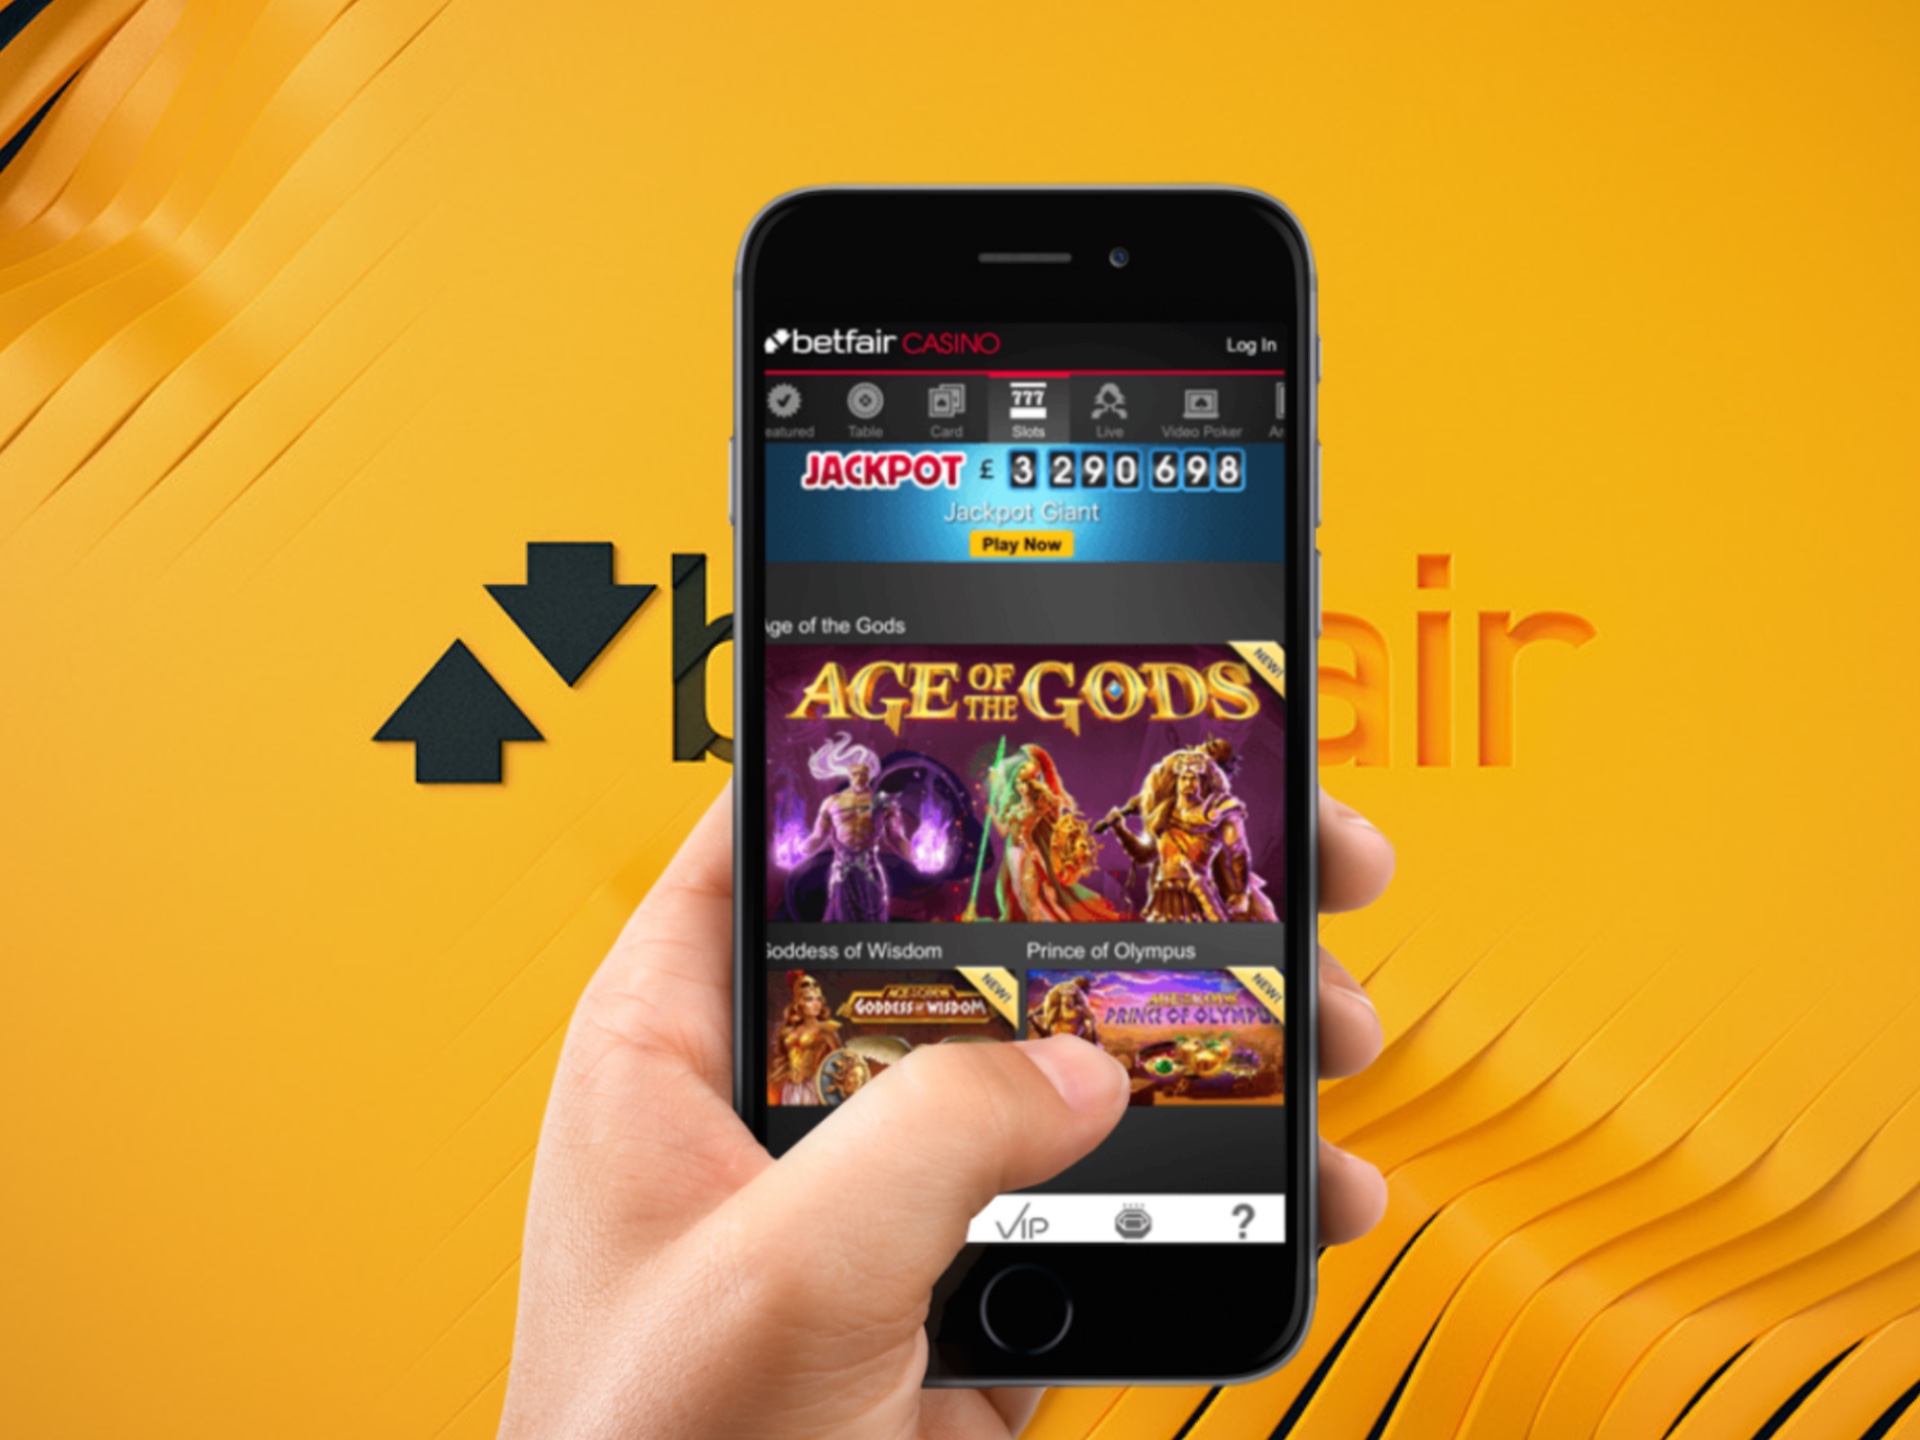 Betfair casino app has all the same features, as a browser version has.